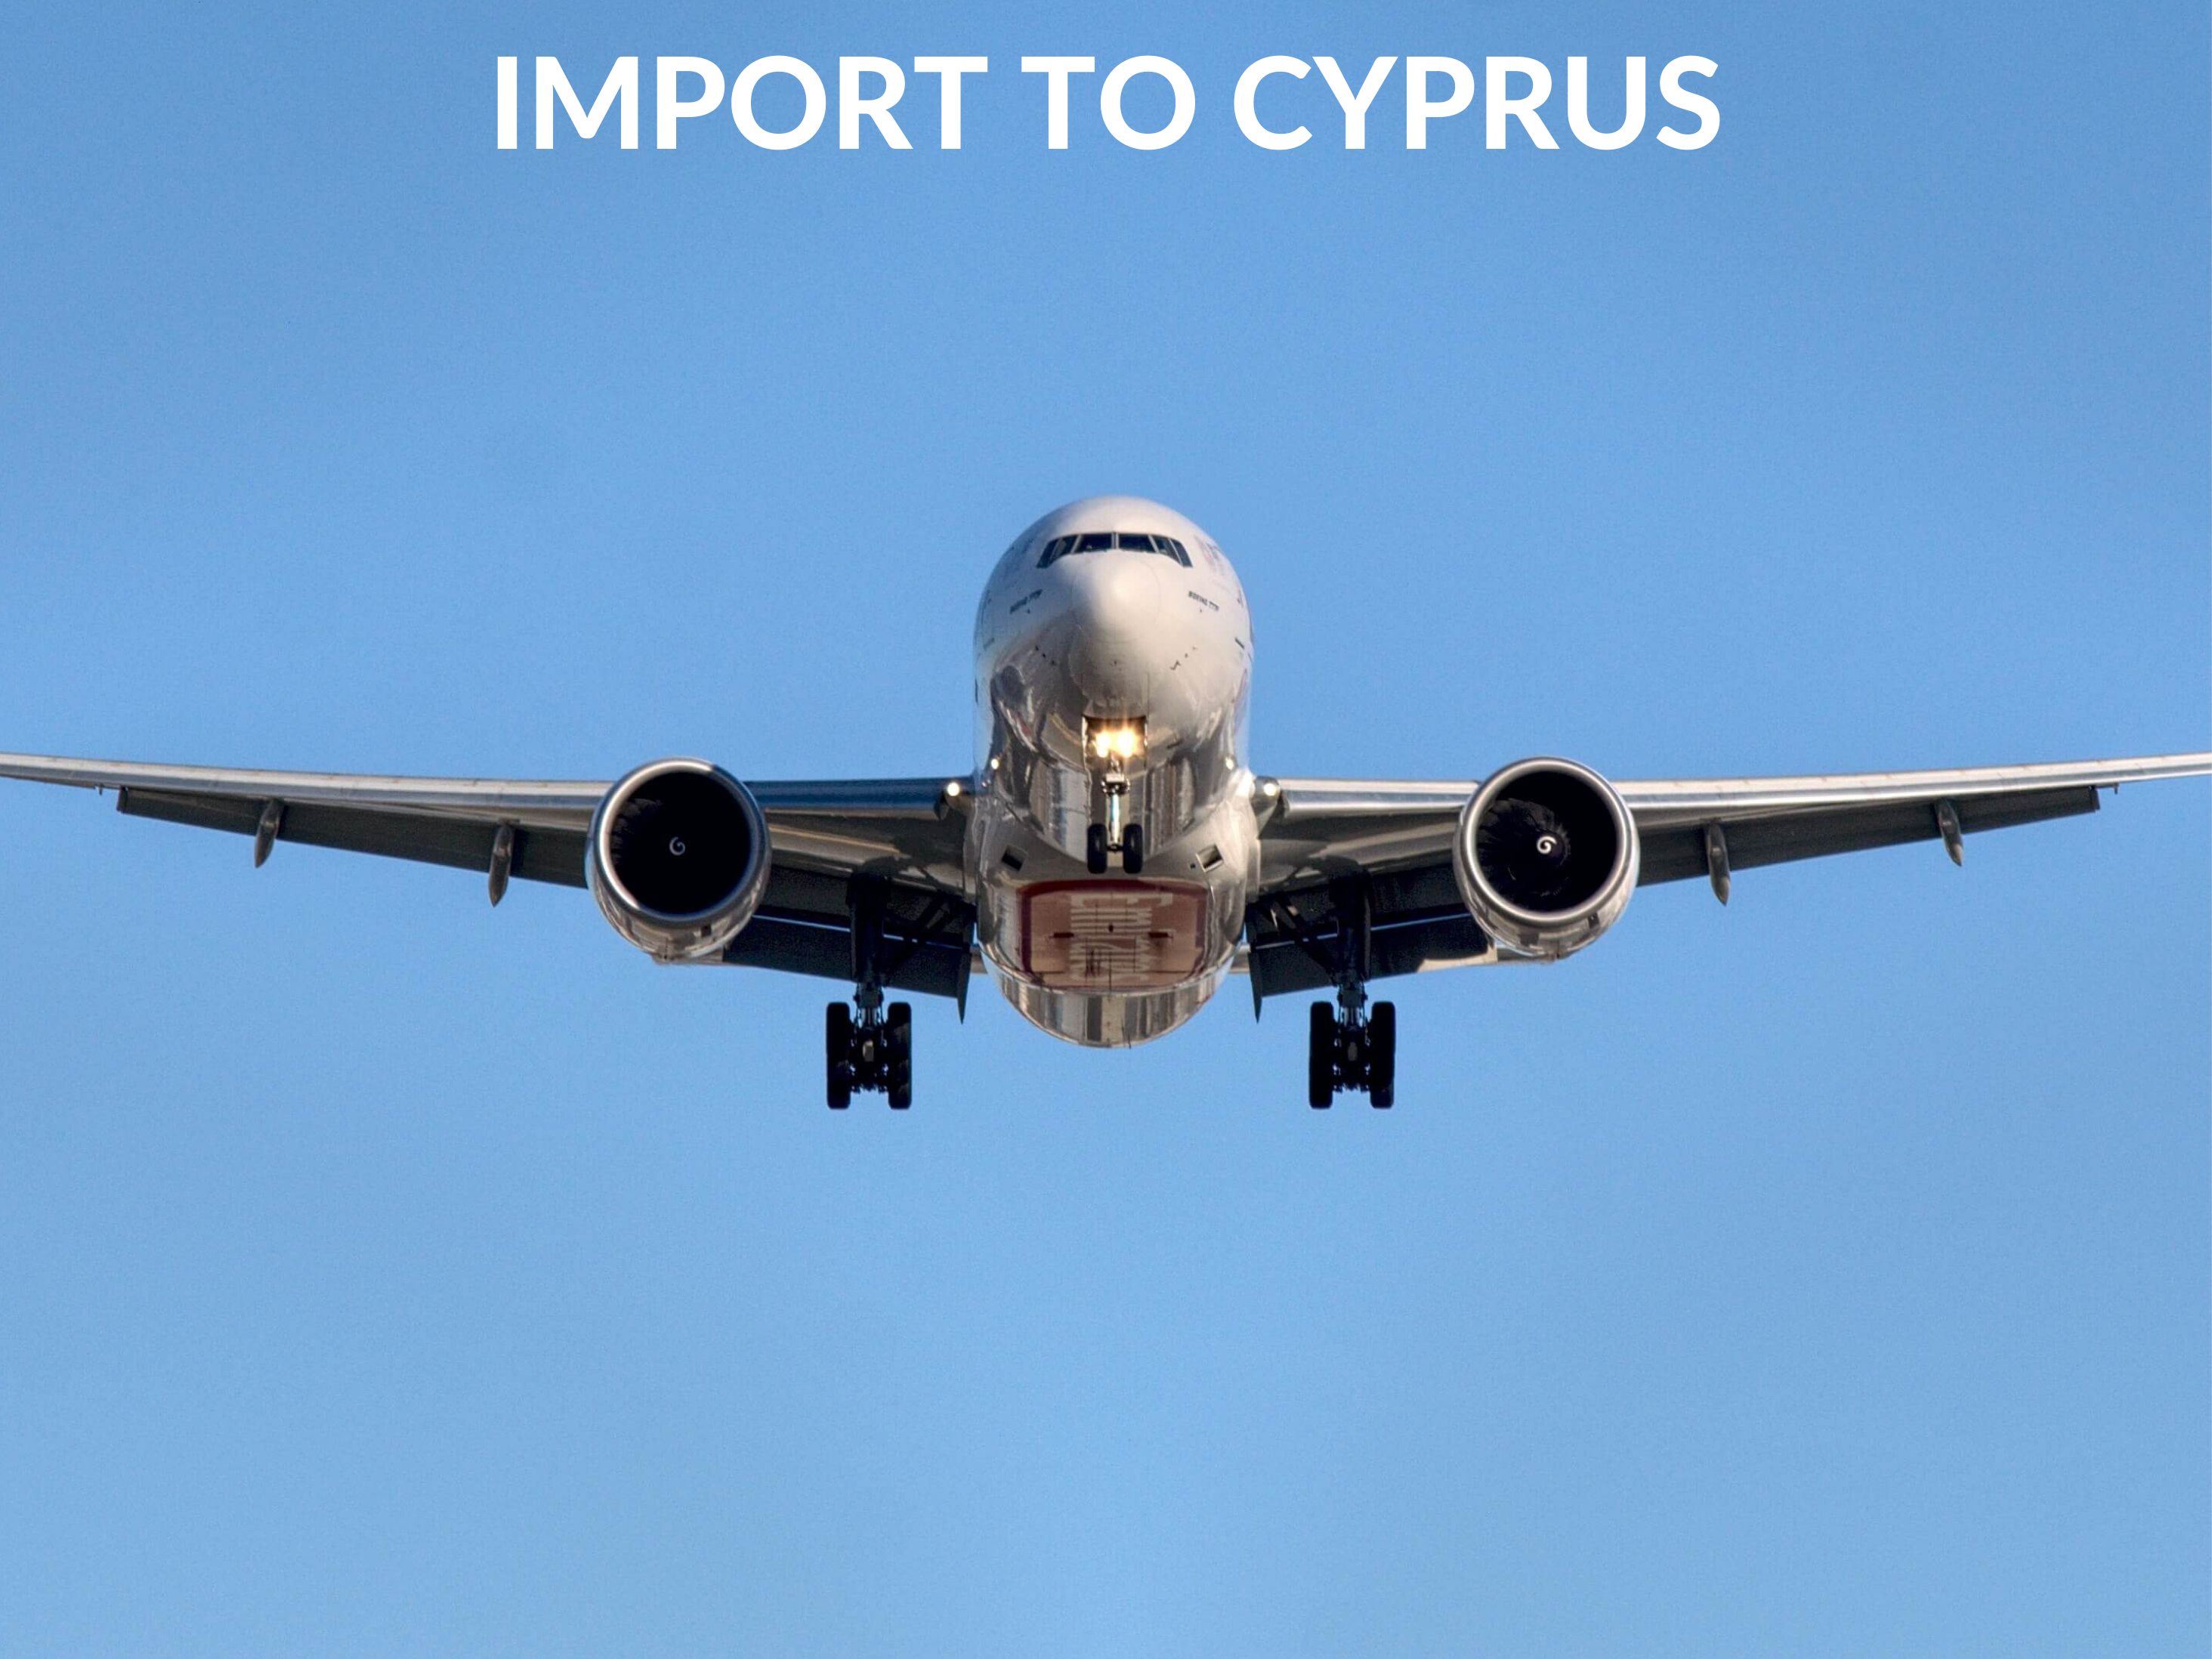 AIR IMPORT RATES TO CYPRUS